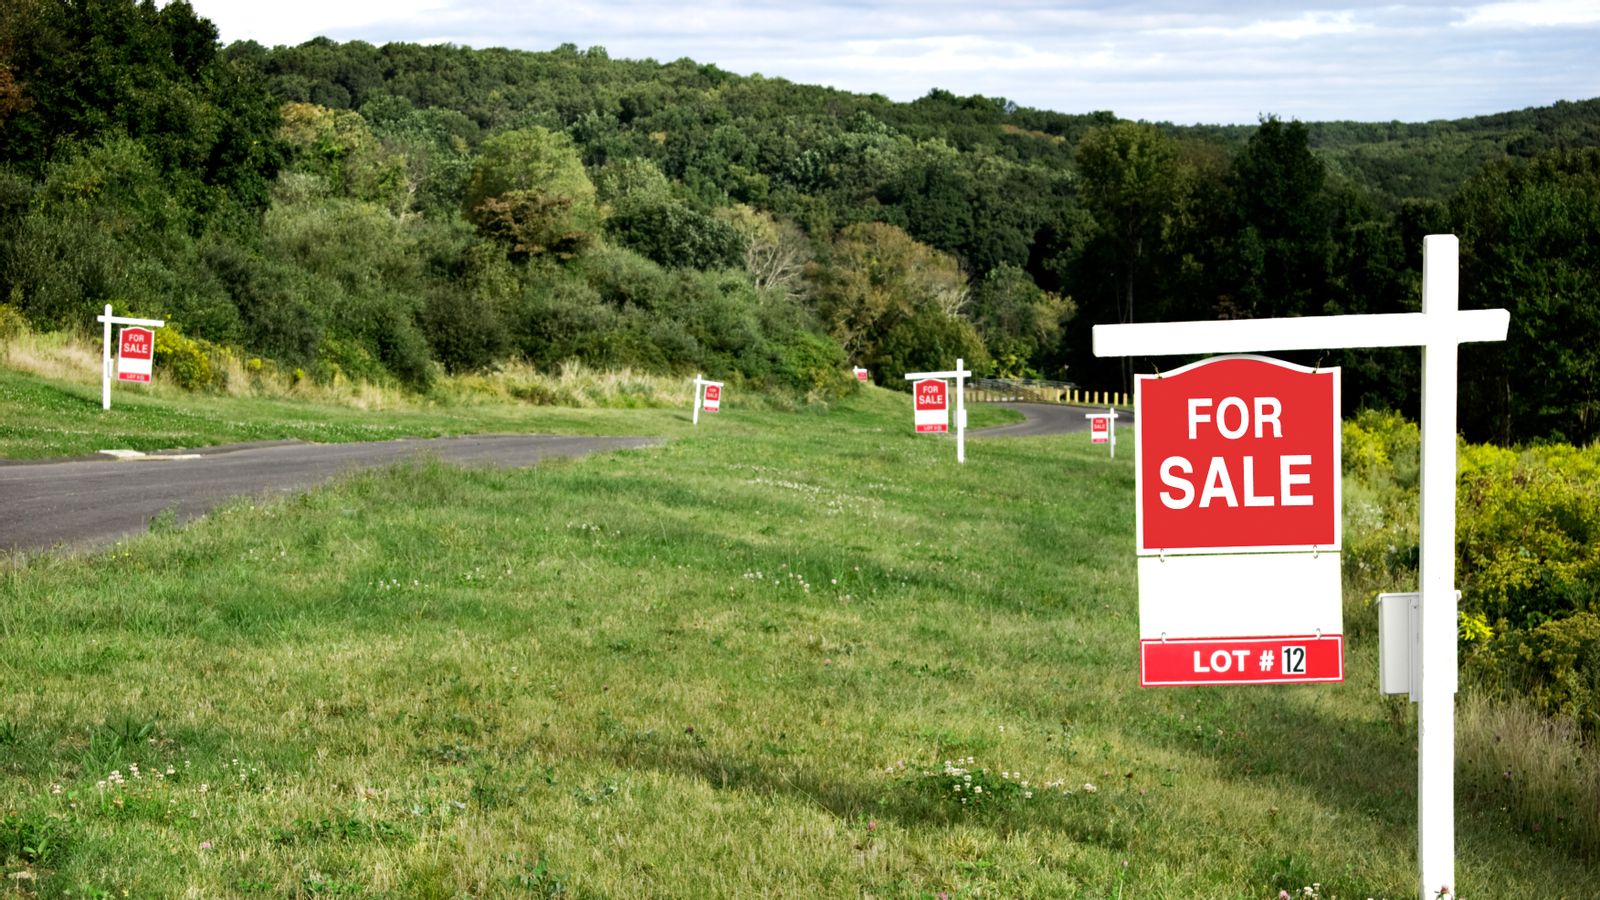 What To Look For When Buying Land For A Home